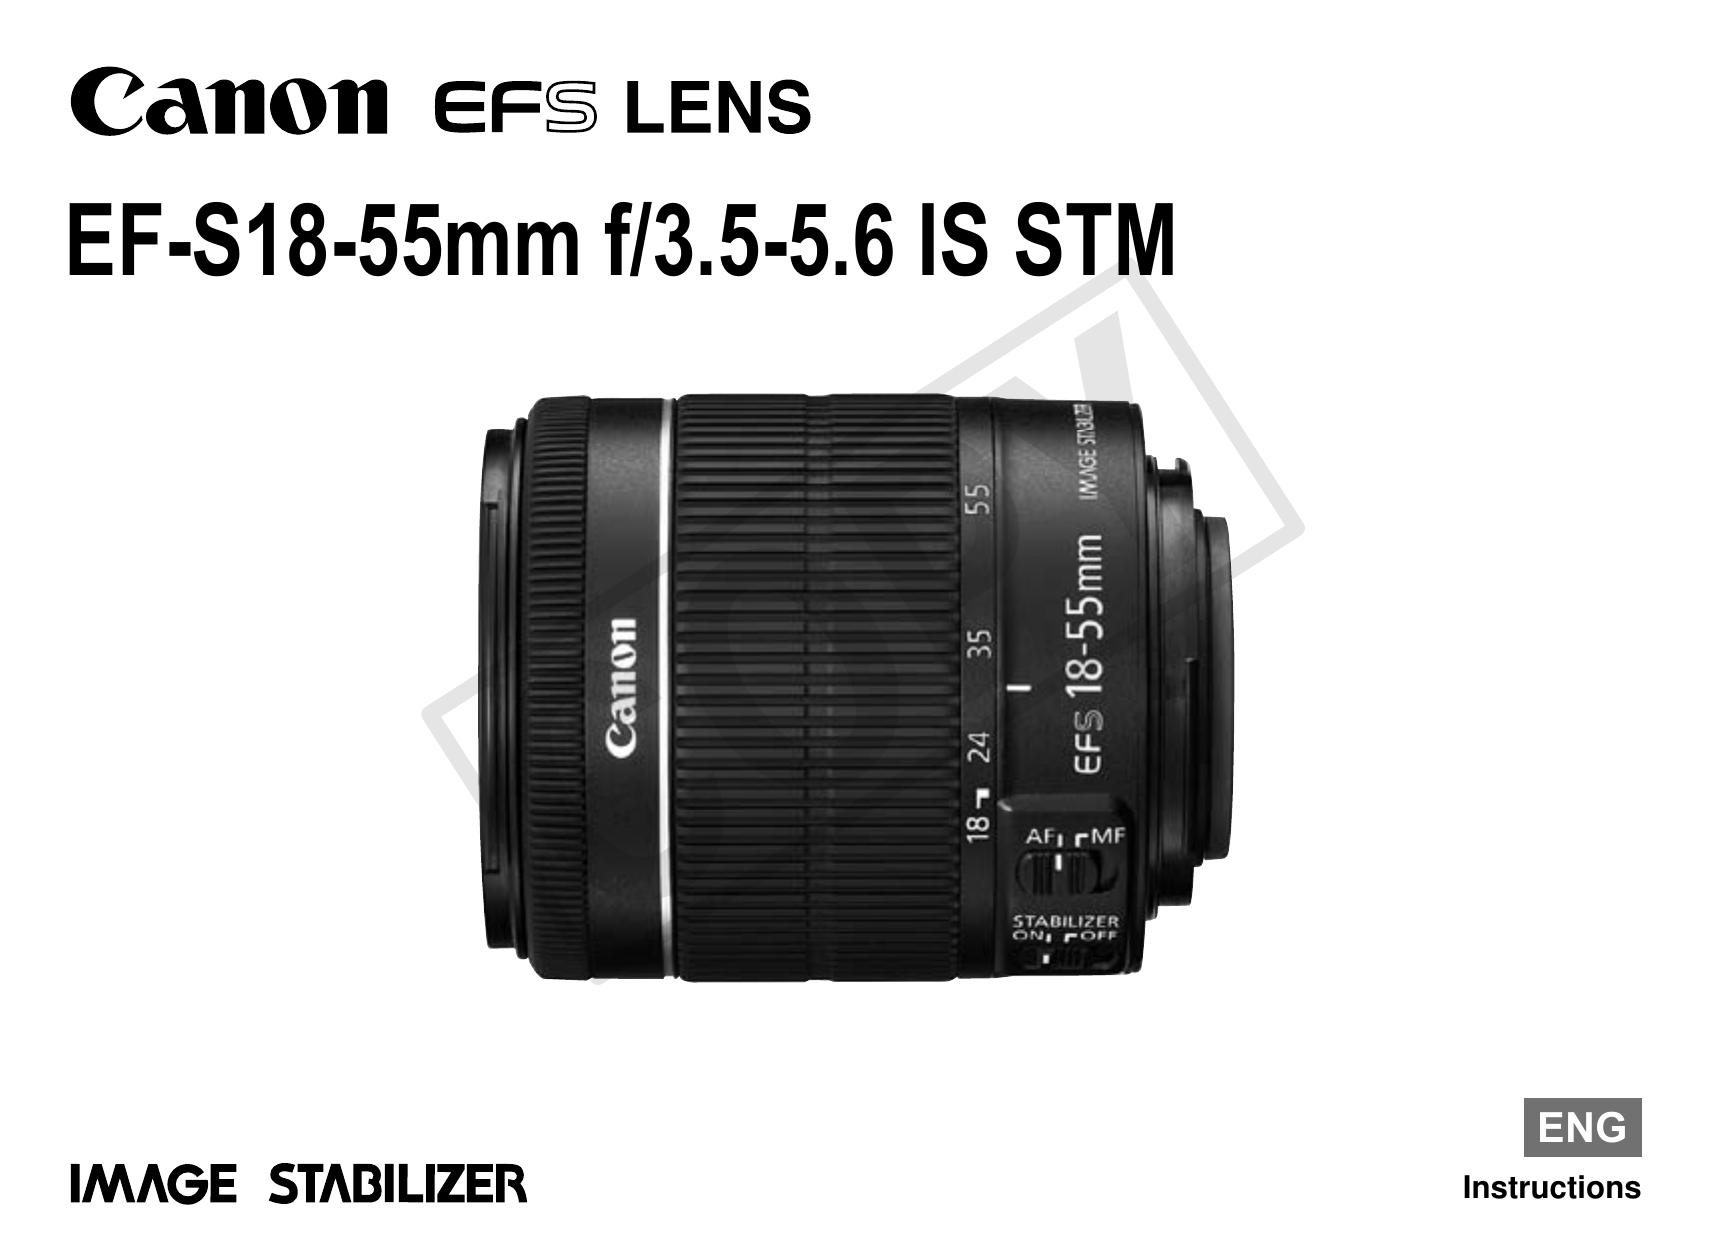 Canon 18-55mm f/3.5-5.6 IS STM Camera Lens User Manual